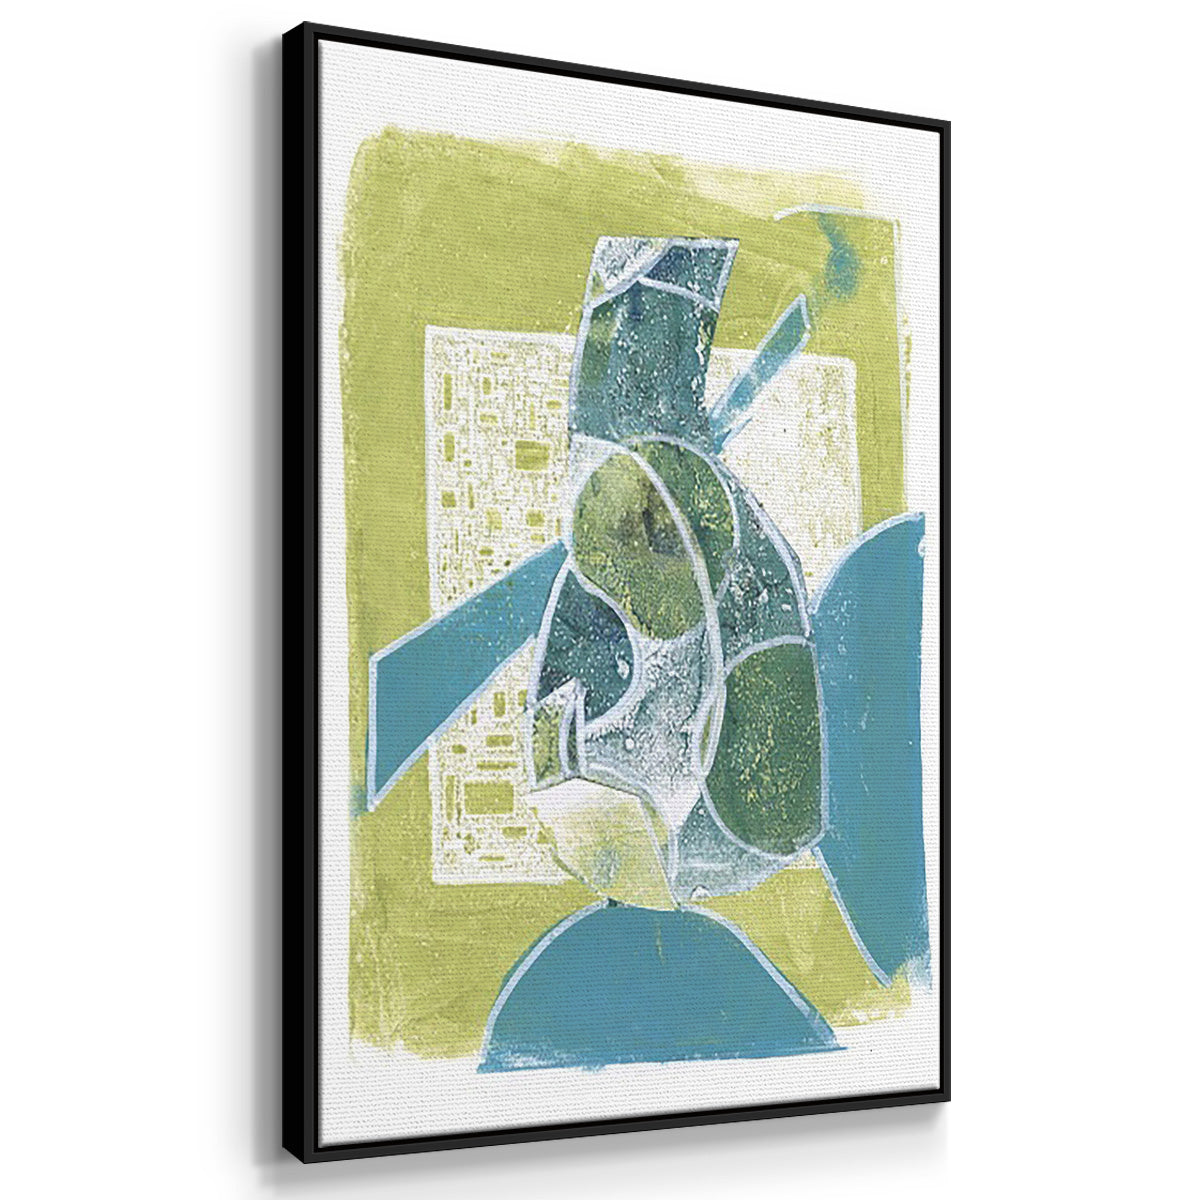 Jubilee Jugs III - Framed Premium Gallery Wrapped Canvas L Frame 3 Piece Set - Ready to Hang